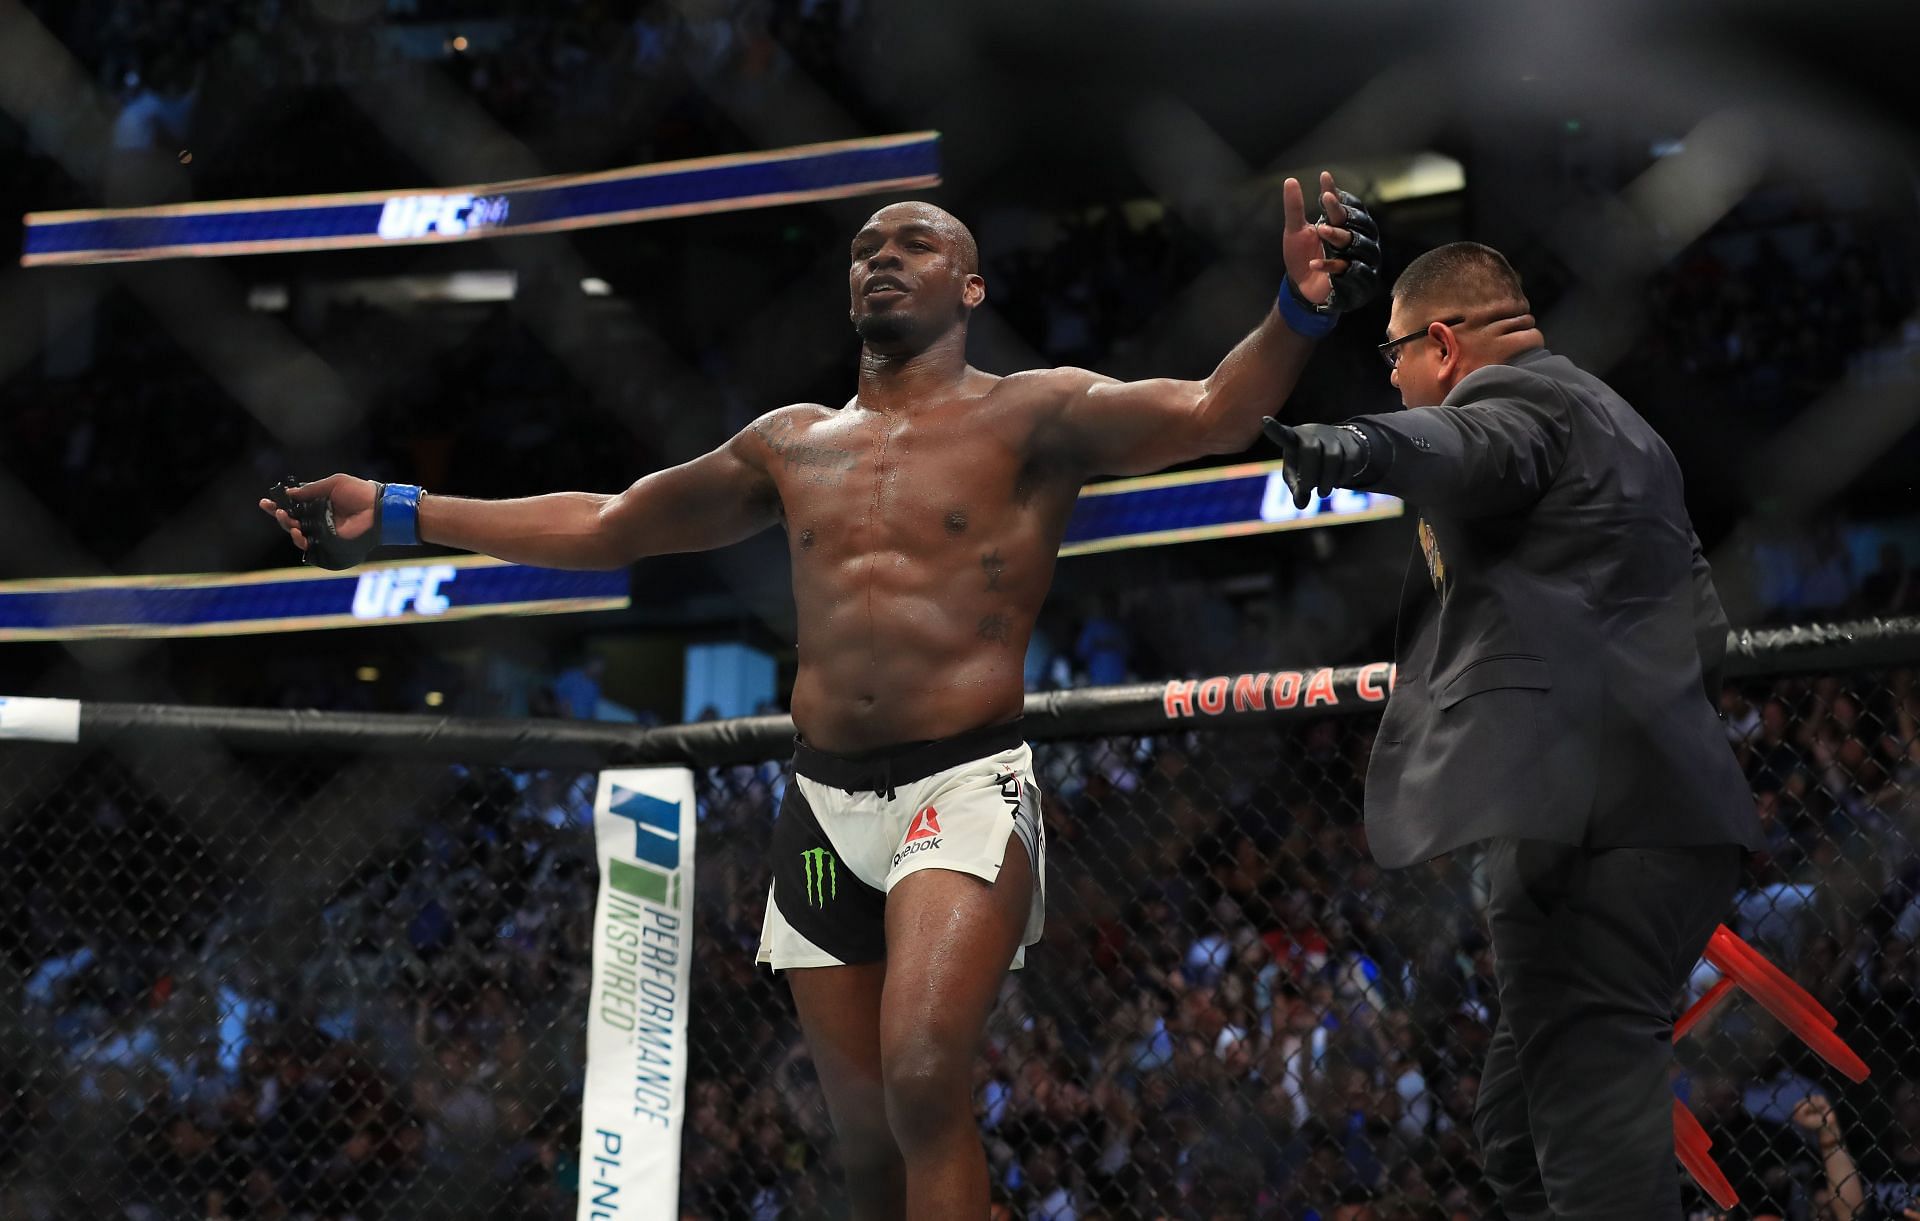 Jon Jones&#039; positive drug test resulted in an entire event being moved across states